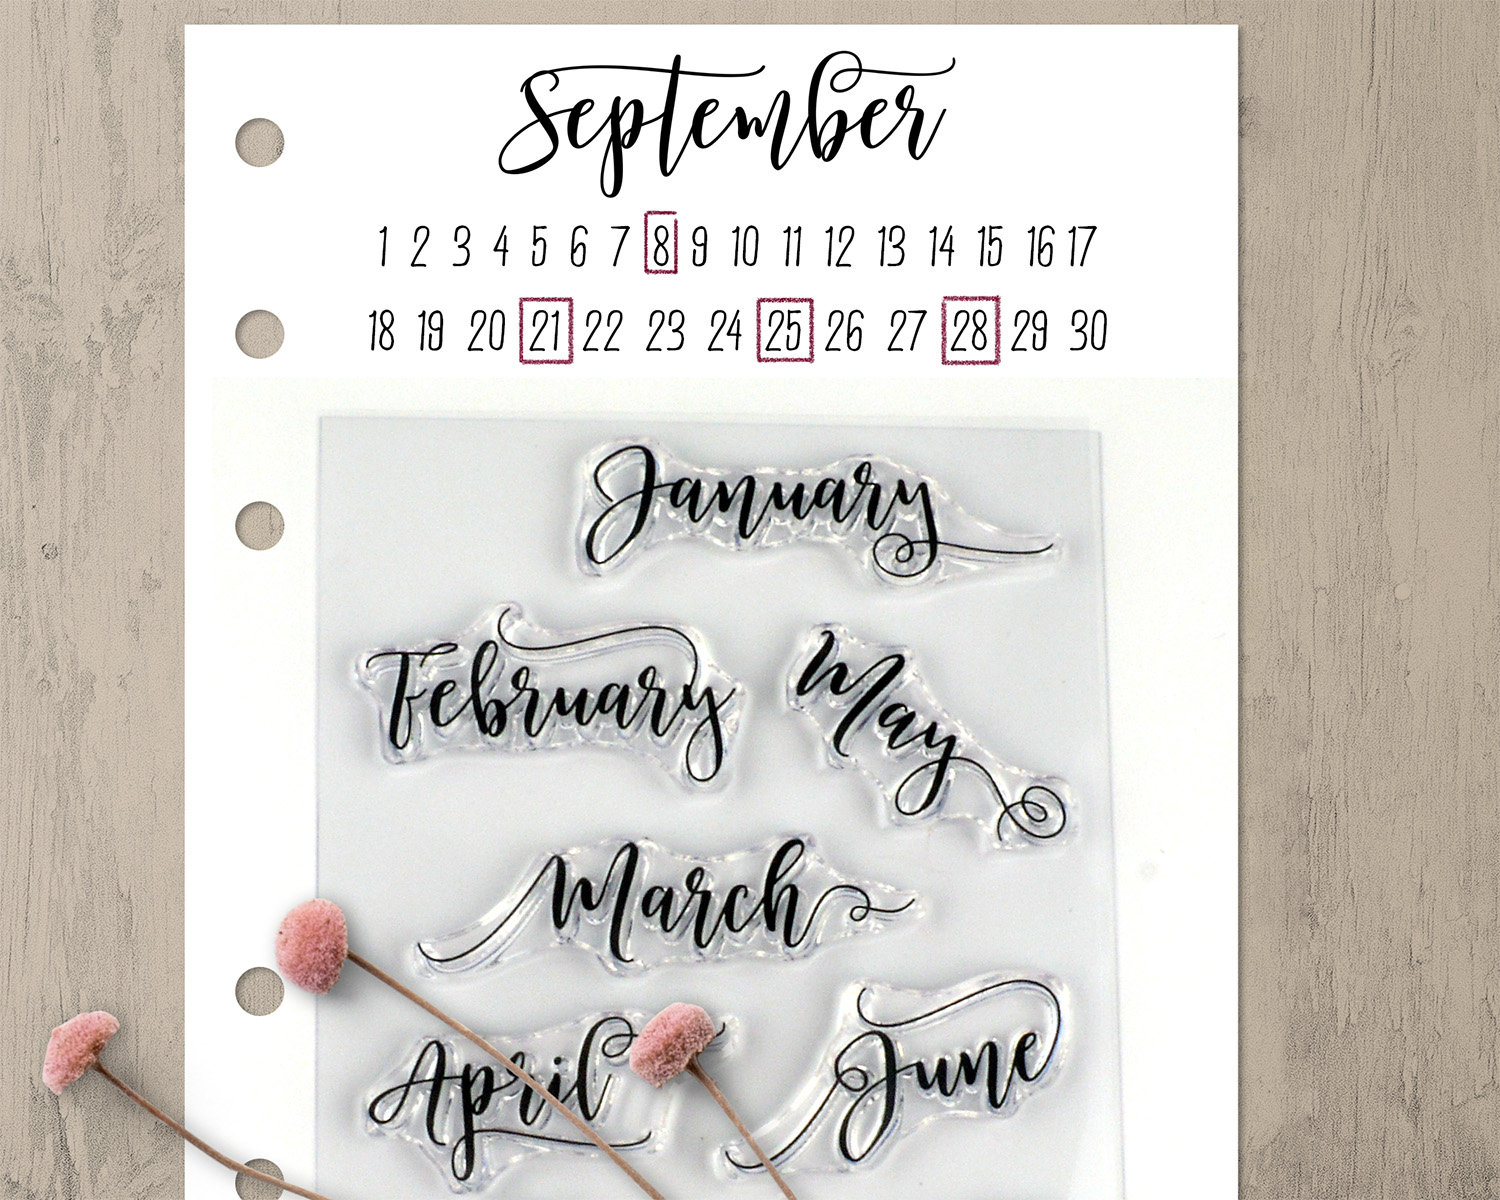 Clear Planner Stamps Calligraphy Days of the Week and Planner Words 